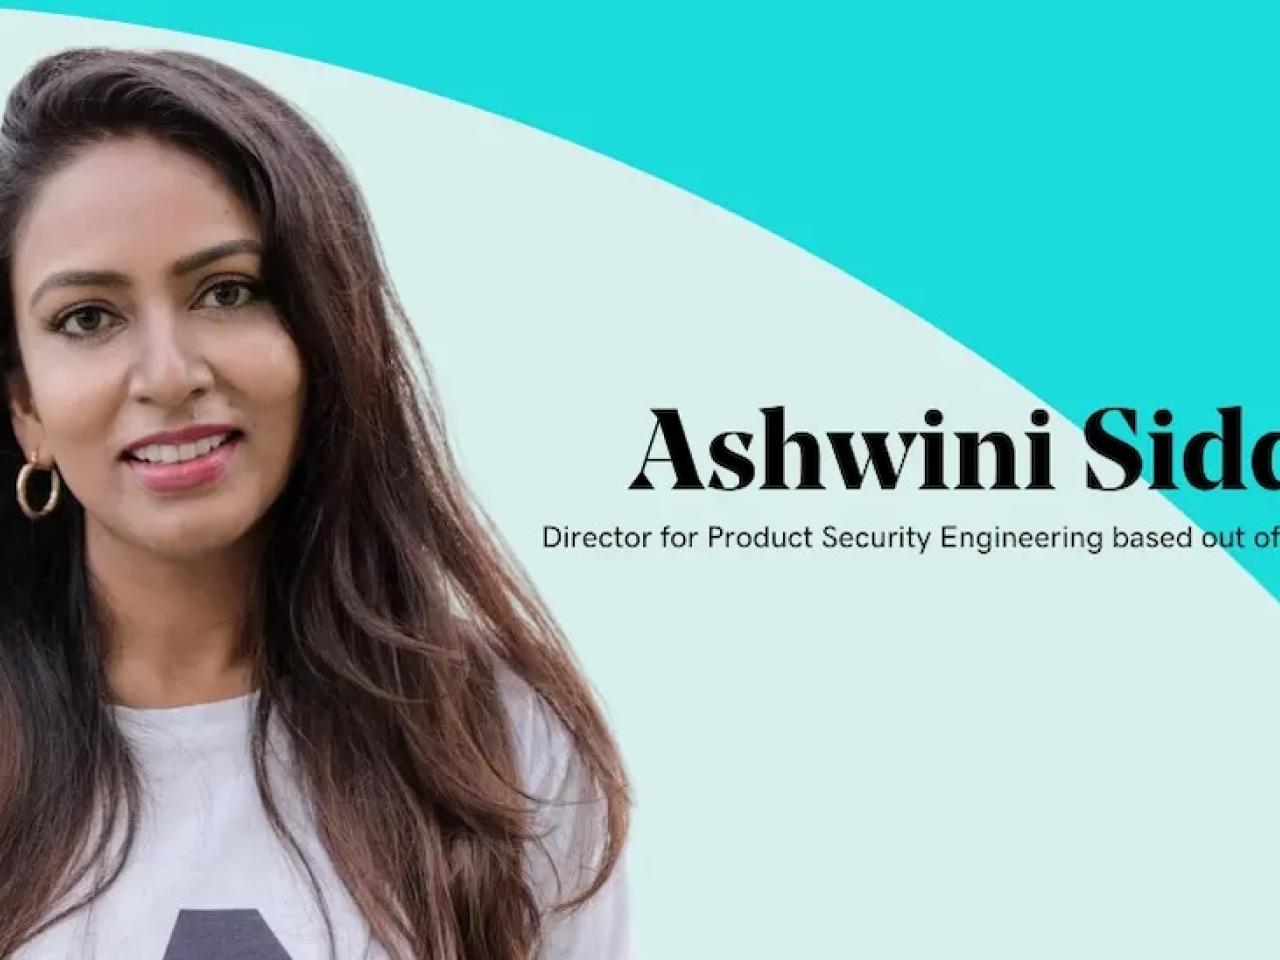 Ashwini Siddhi, Director for Product Security Engineering based out of Bangalore, India.